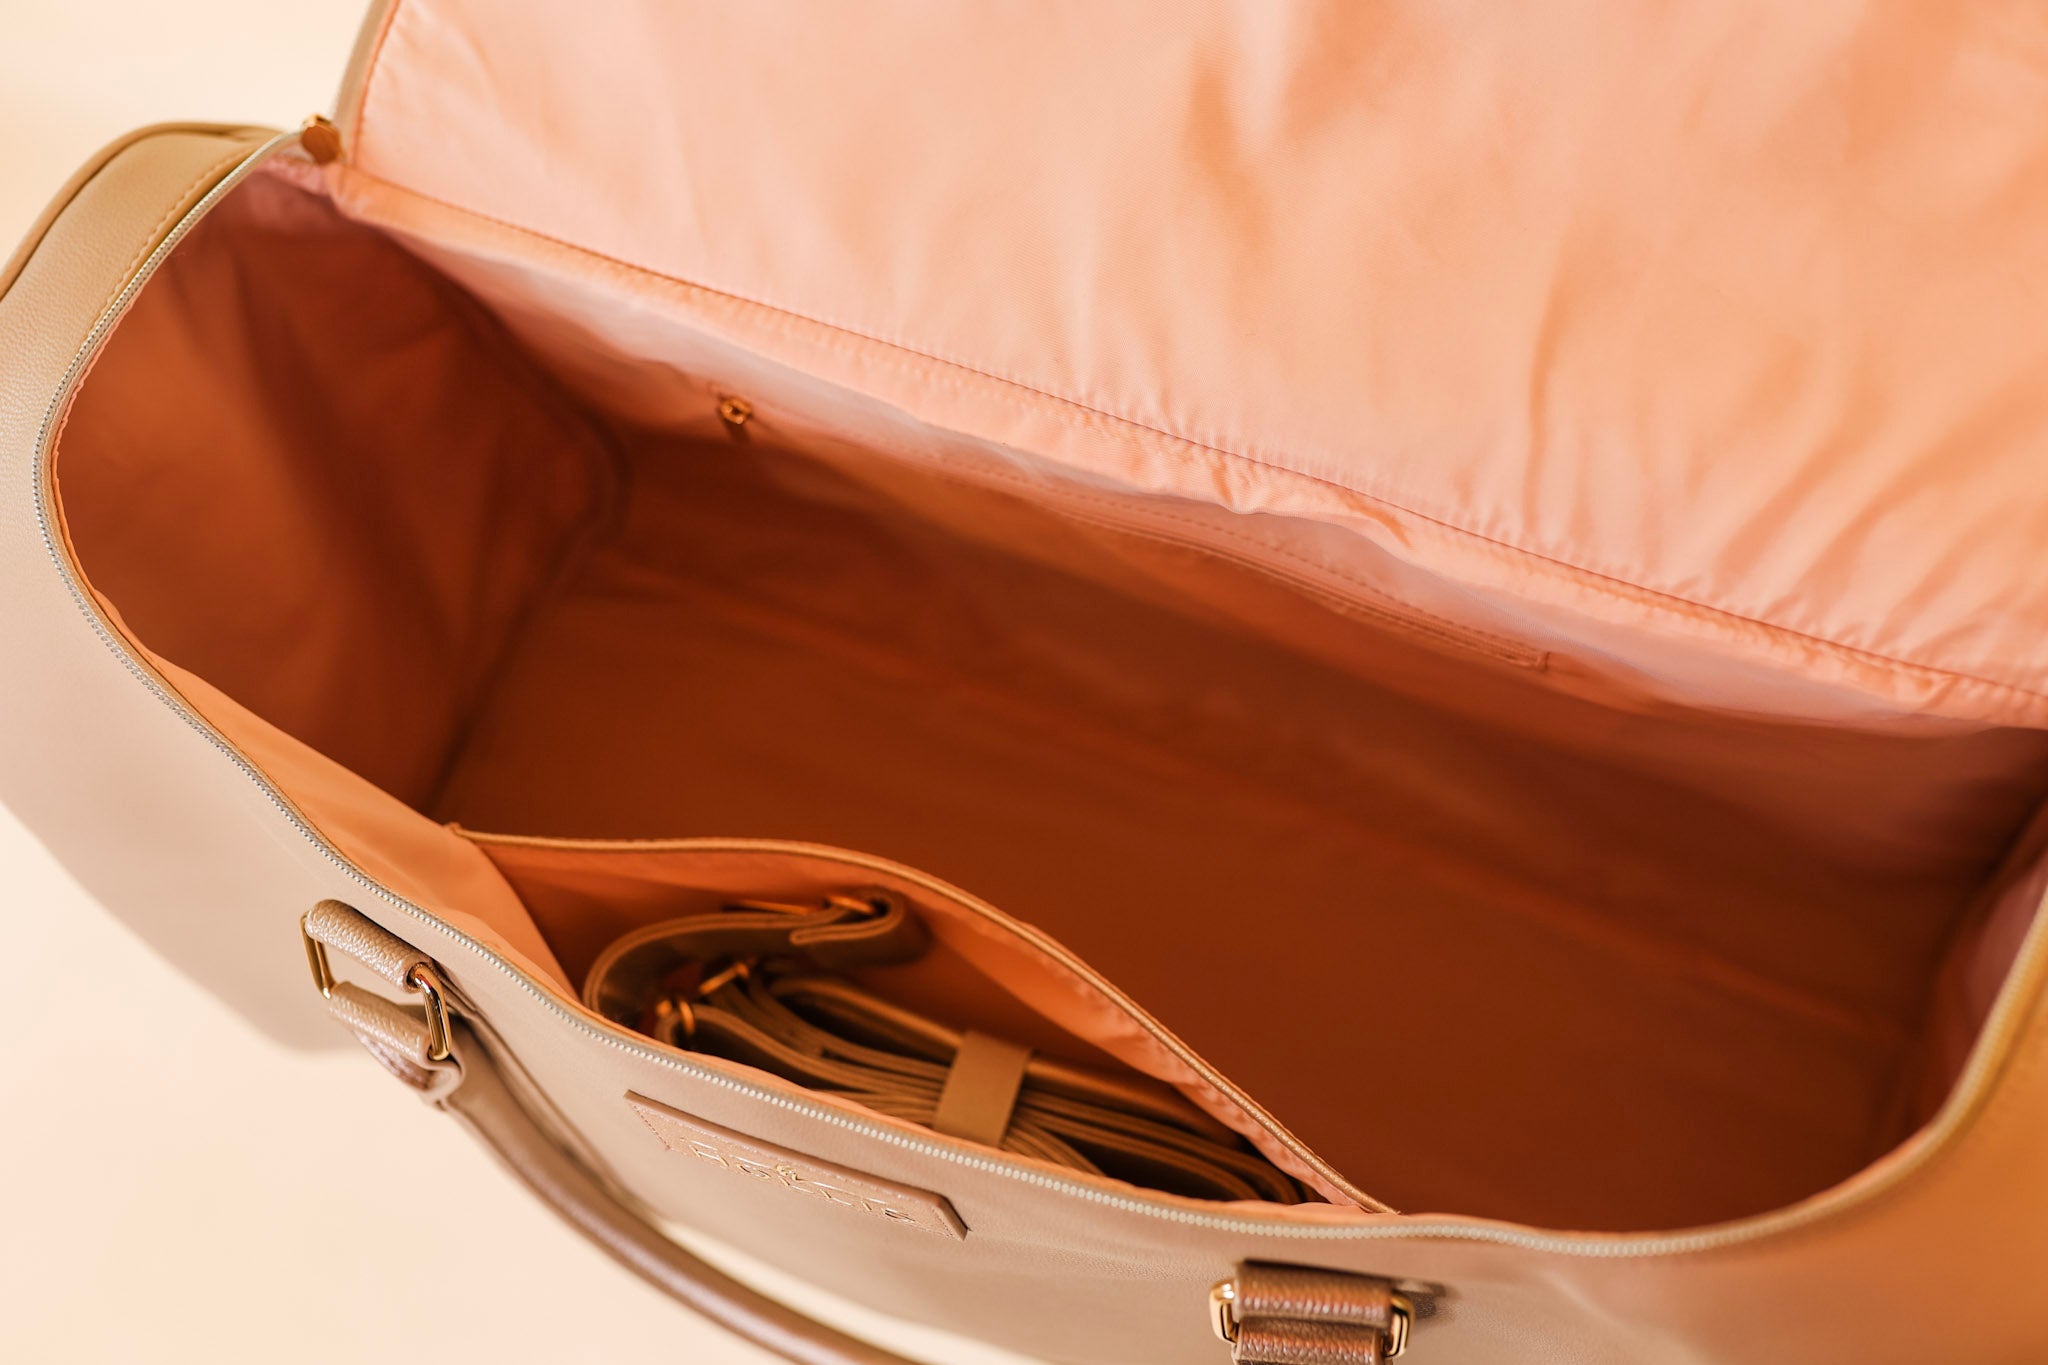 Hollis | Lux Weekender Bag in Nude - Giddy Up Glamour Boutique